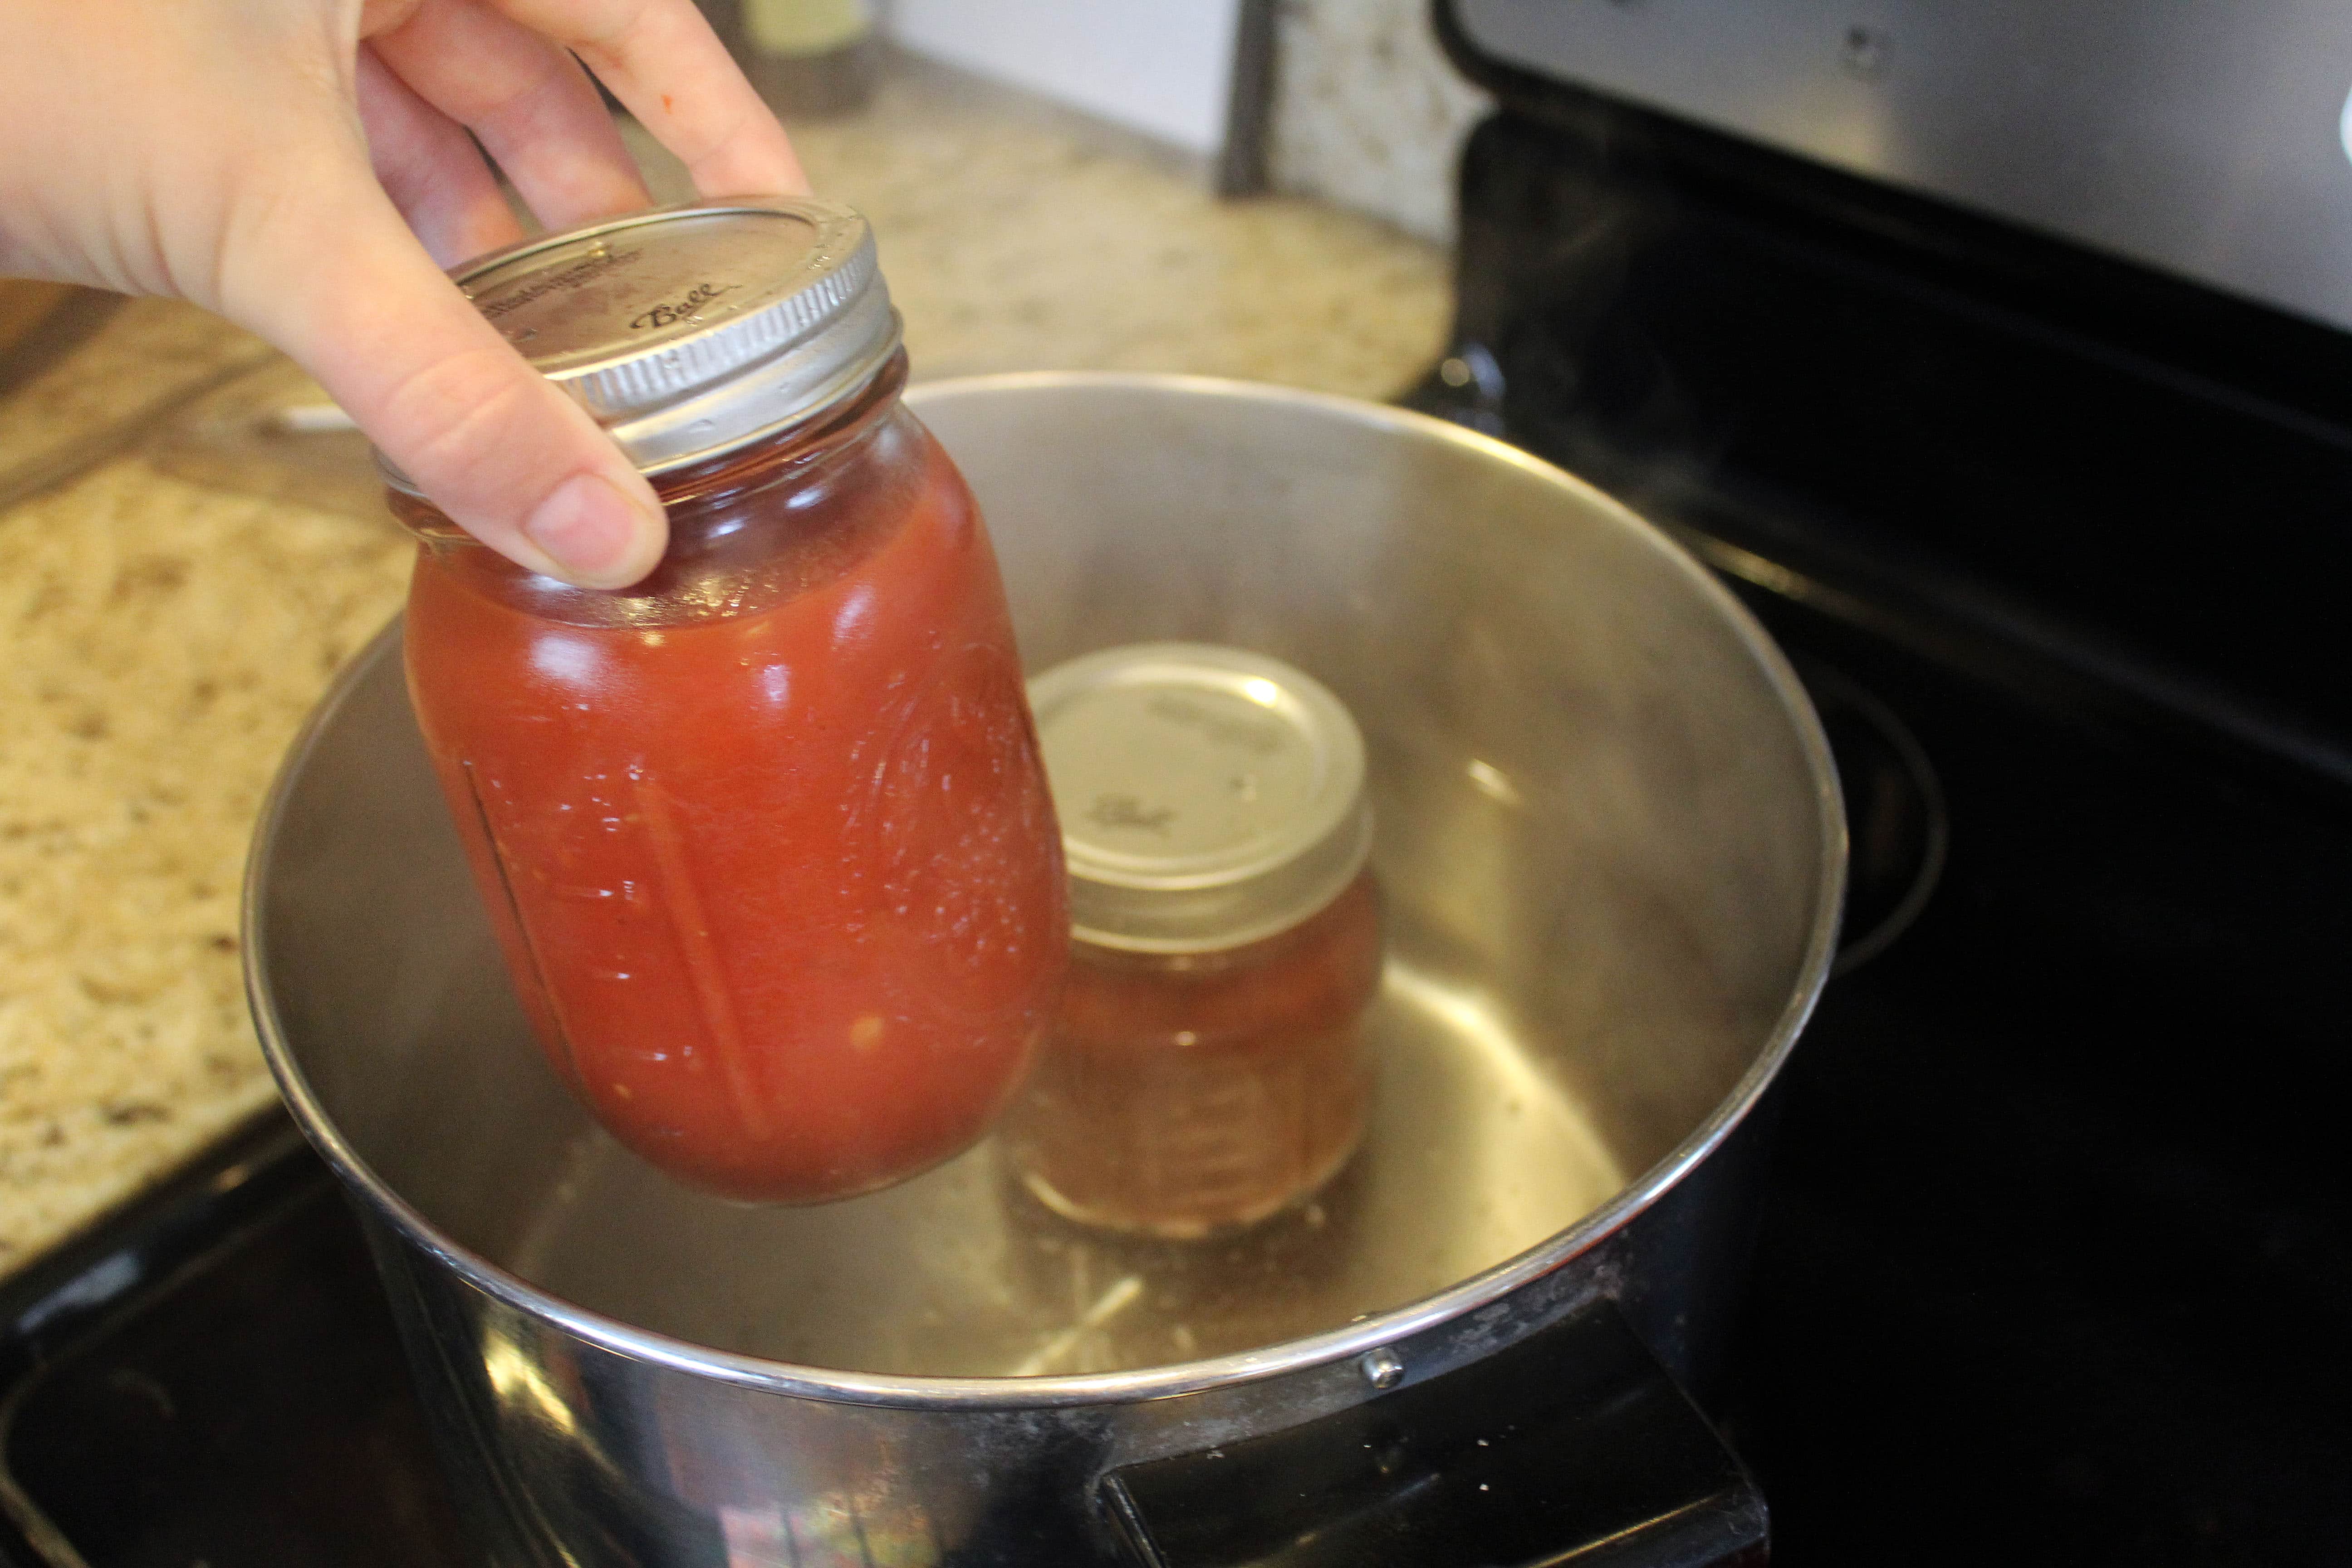 Gently lower jars into simmering water